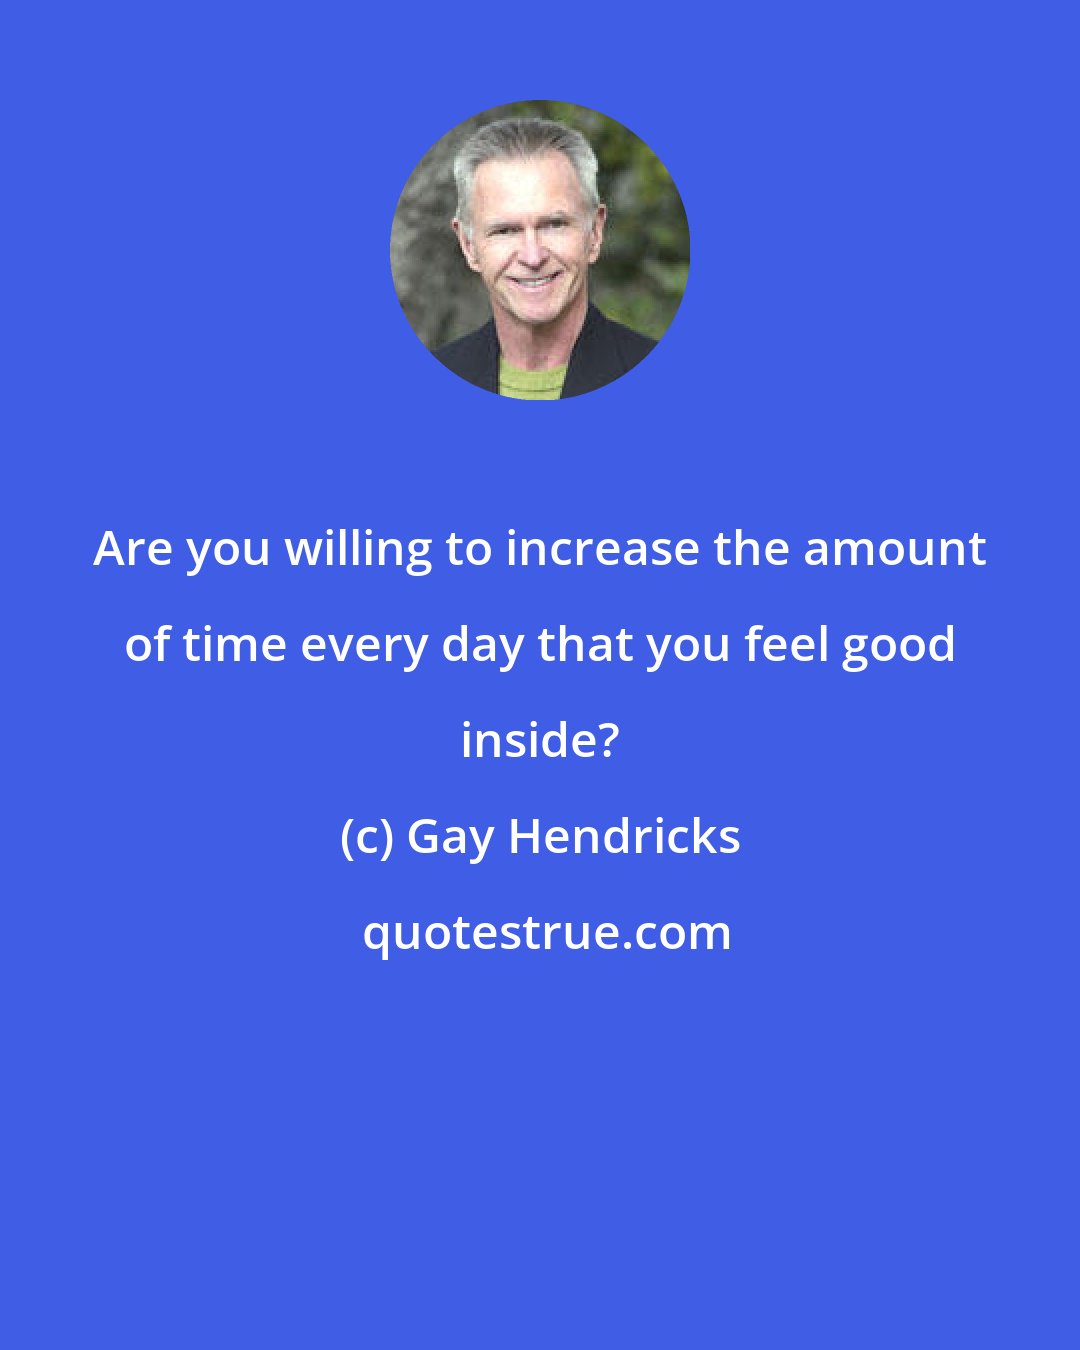 Gay Hendricks: Are you willing to increase the amount of time every day that you feel good inside?